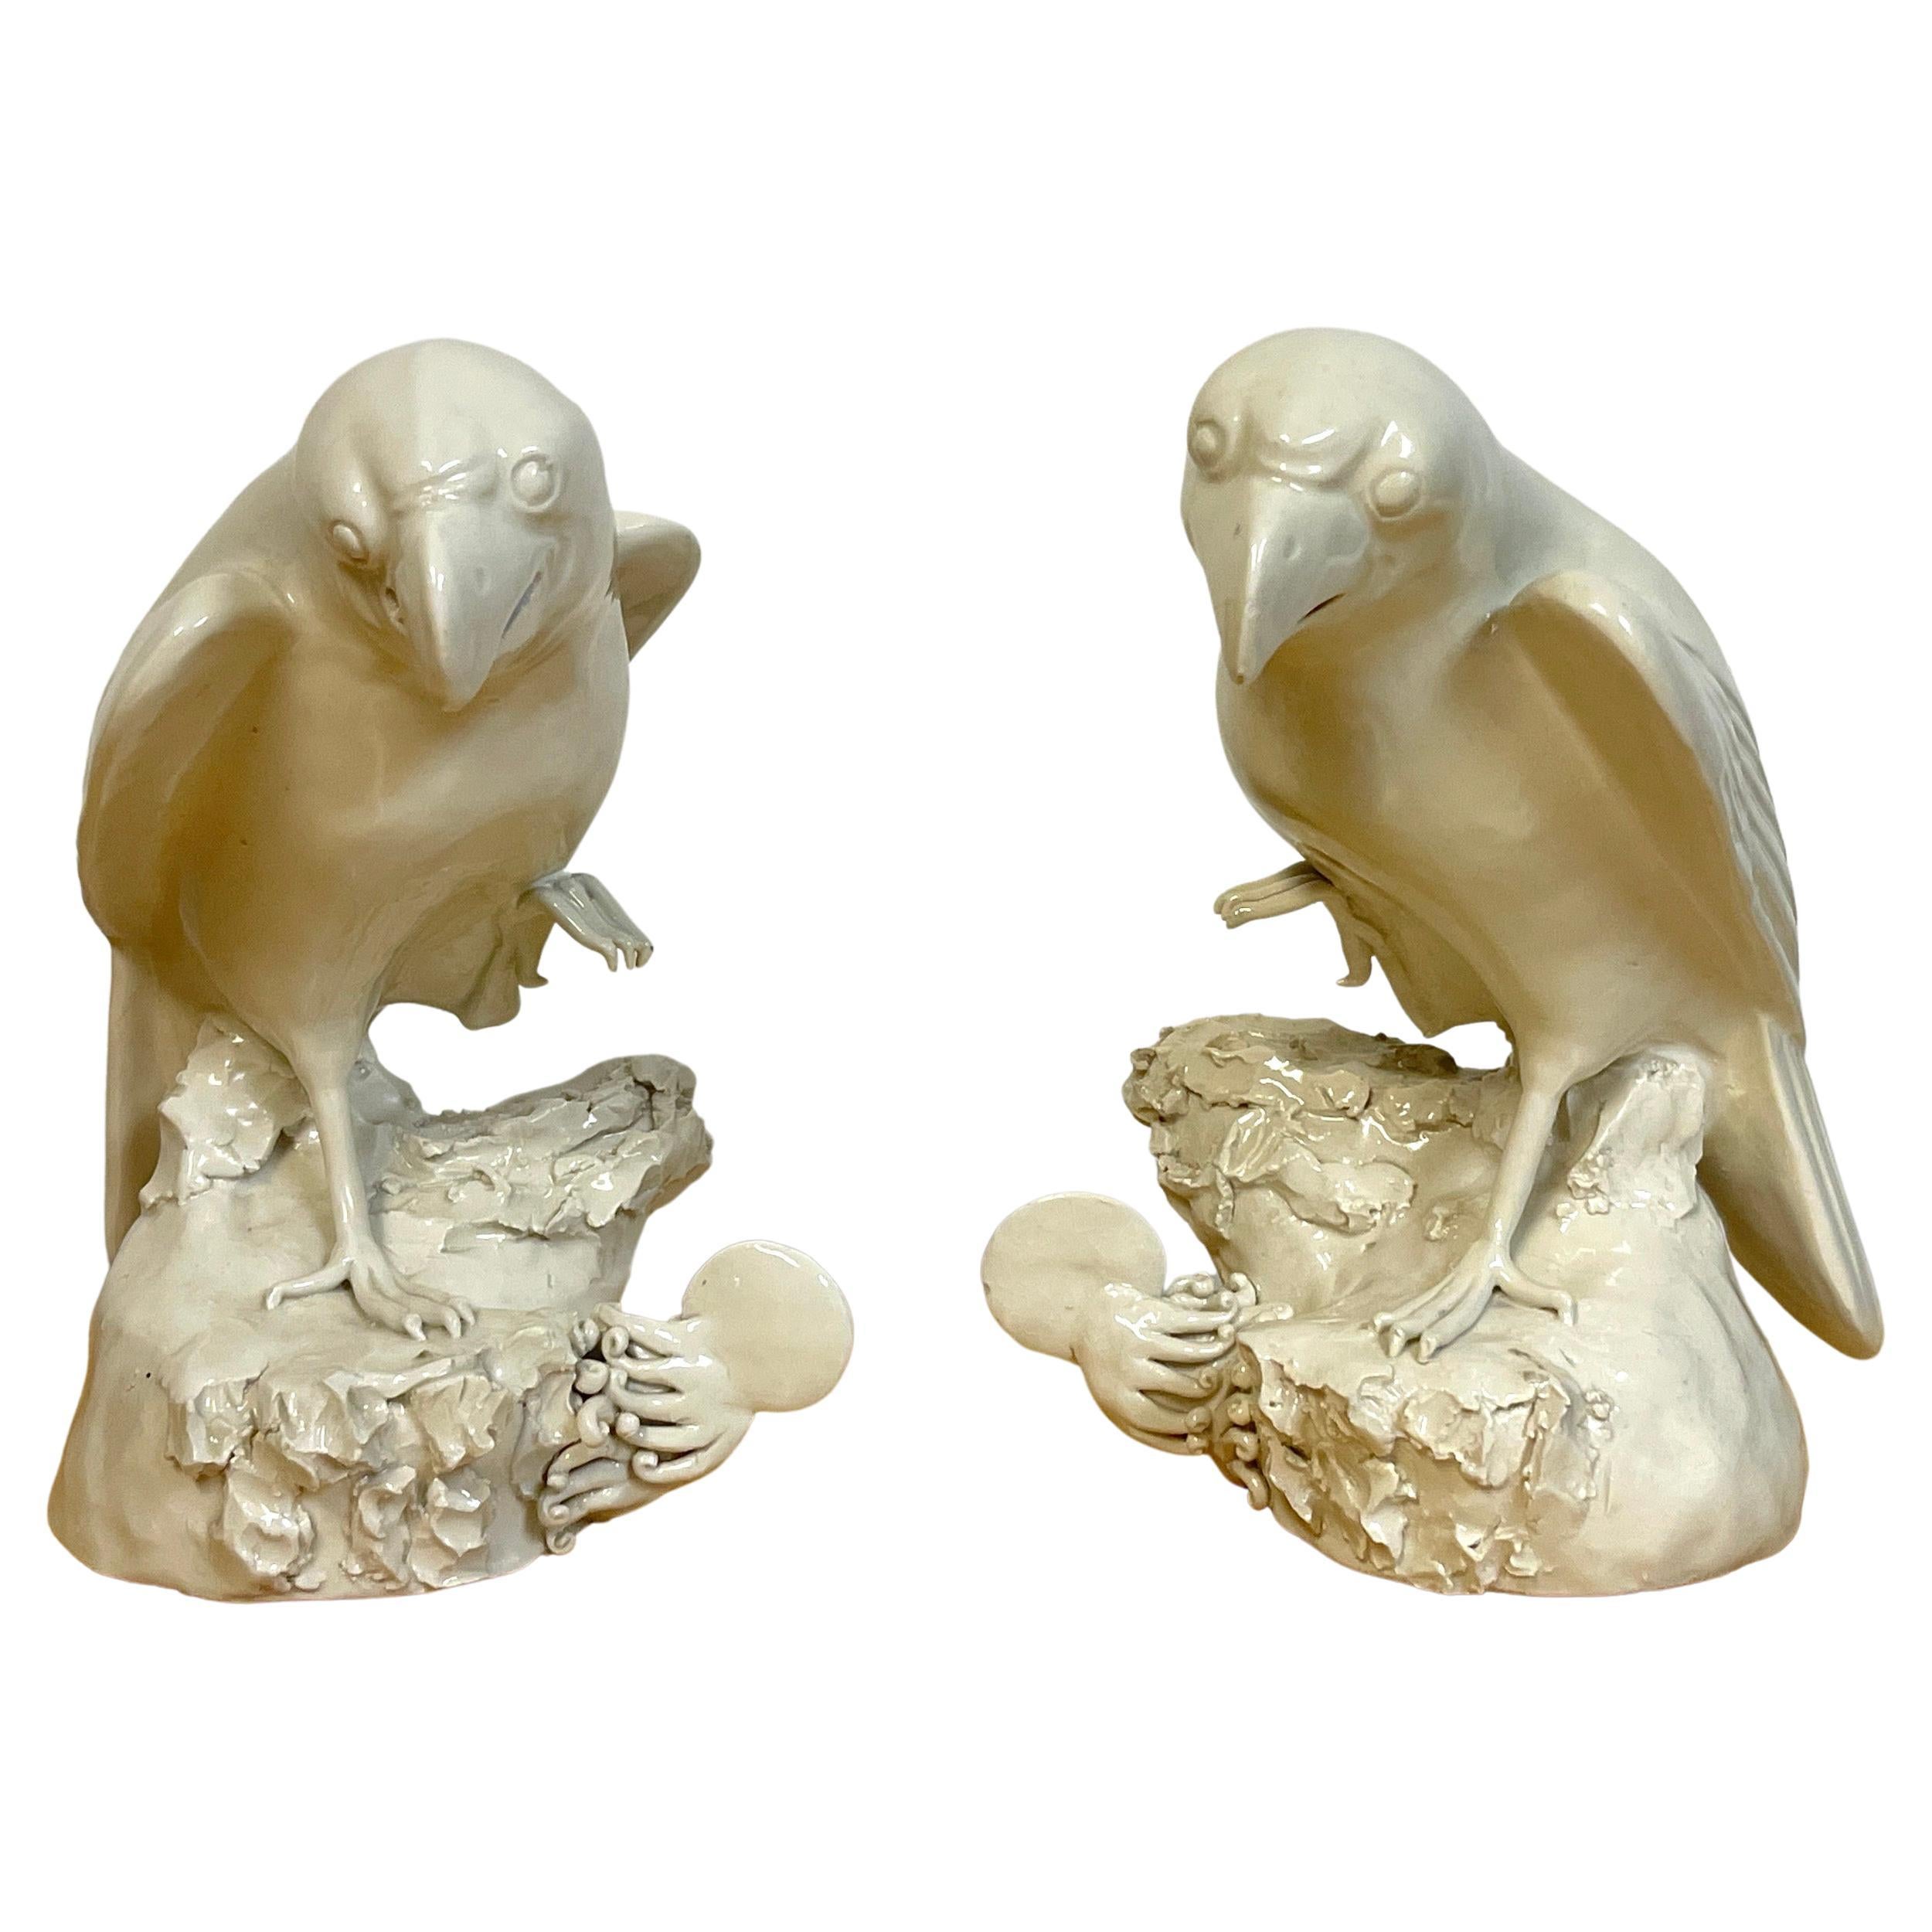 Pair of 19th C Chinese Blanc de Chine Figures of Parrots